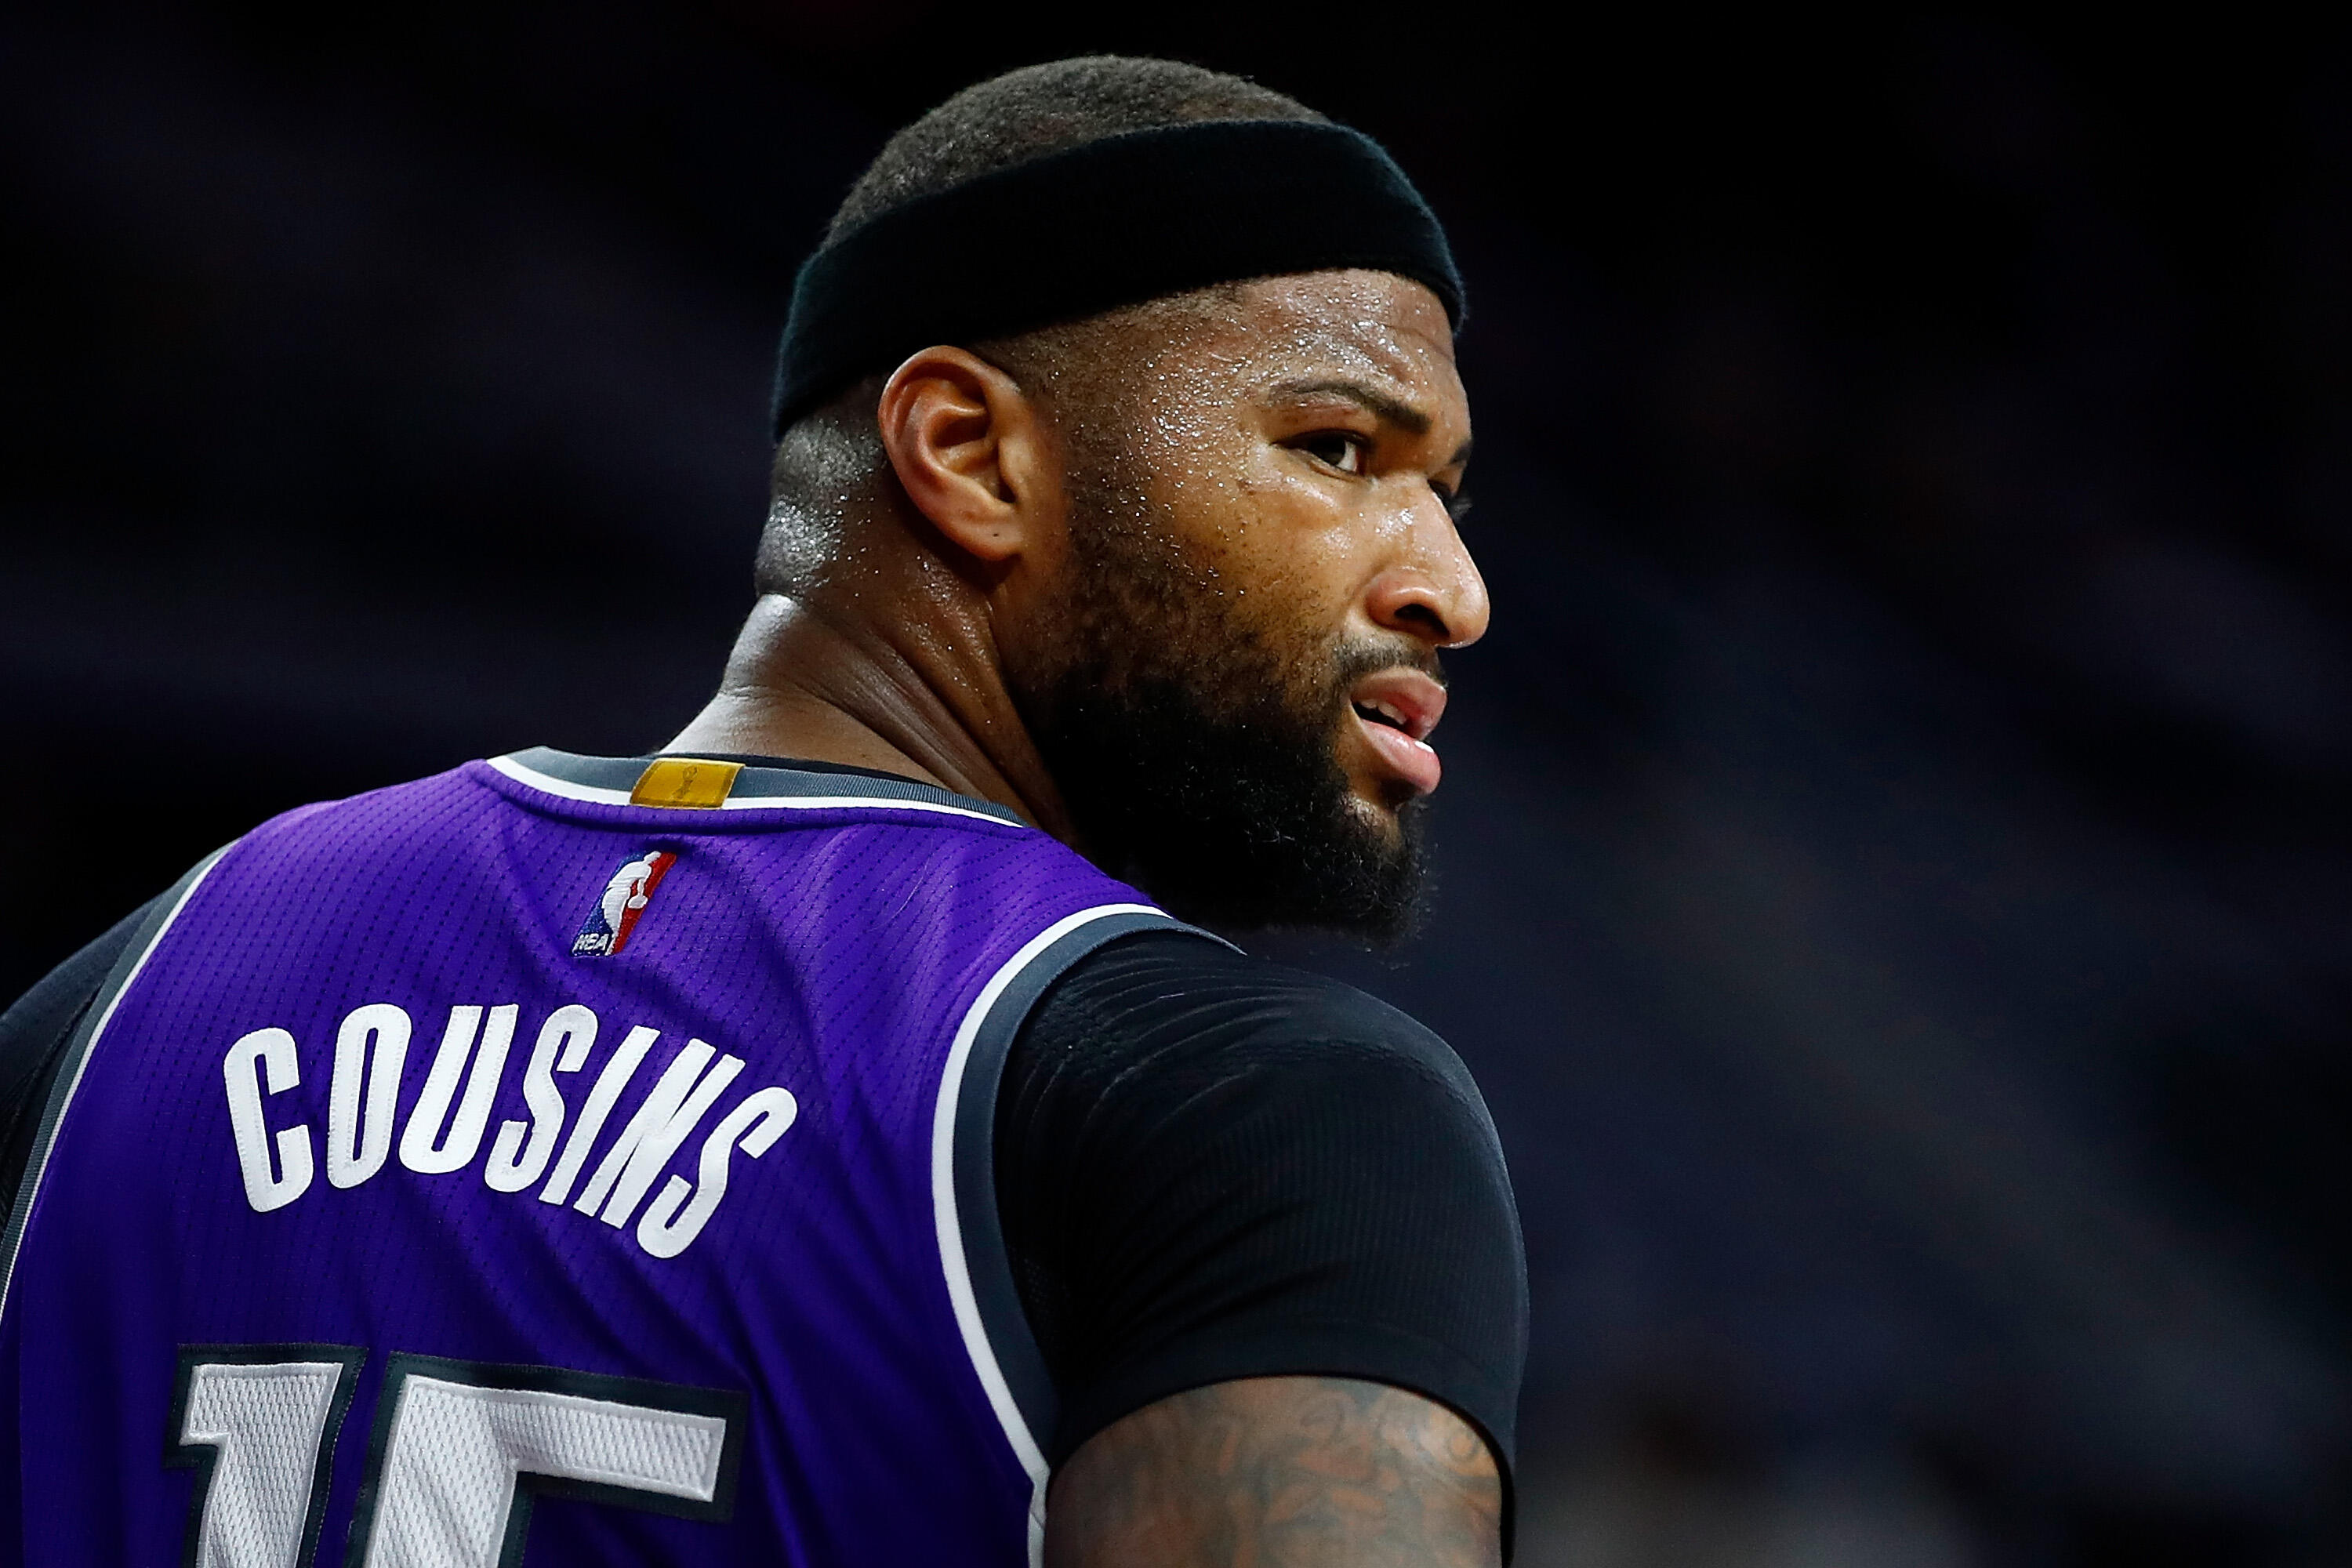 AUBURN HILLS, MI - JANUARY 23: DeMarcus Cousins #15 of the Sacramento Kings looks on while playing the Detroit Pistons at the Palace of Auburn Hills on January 23, 2017 in Auburn Hills, Michigan. Sacramento won the game 109-104. NOTE TO USER: User express